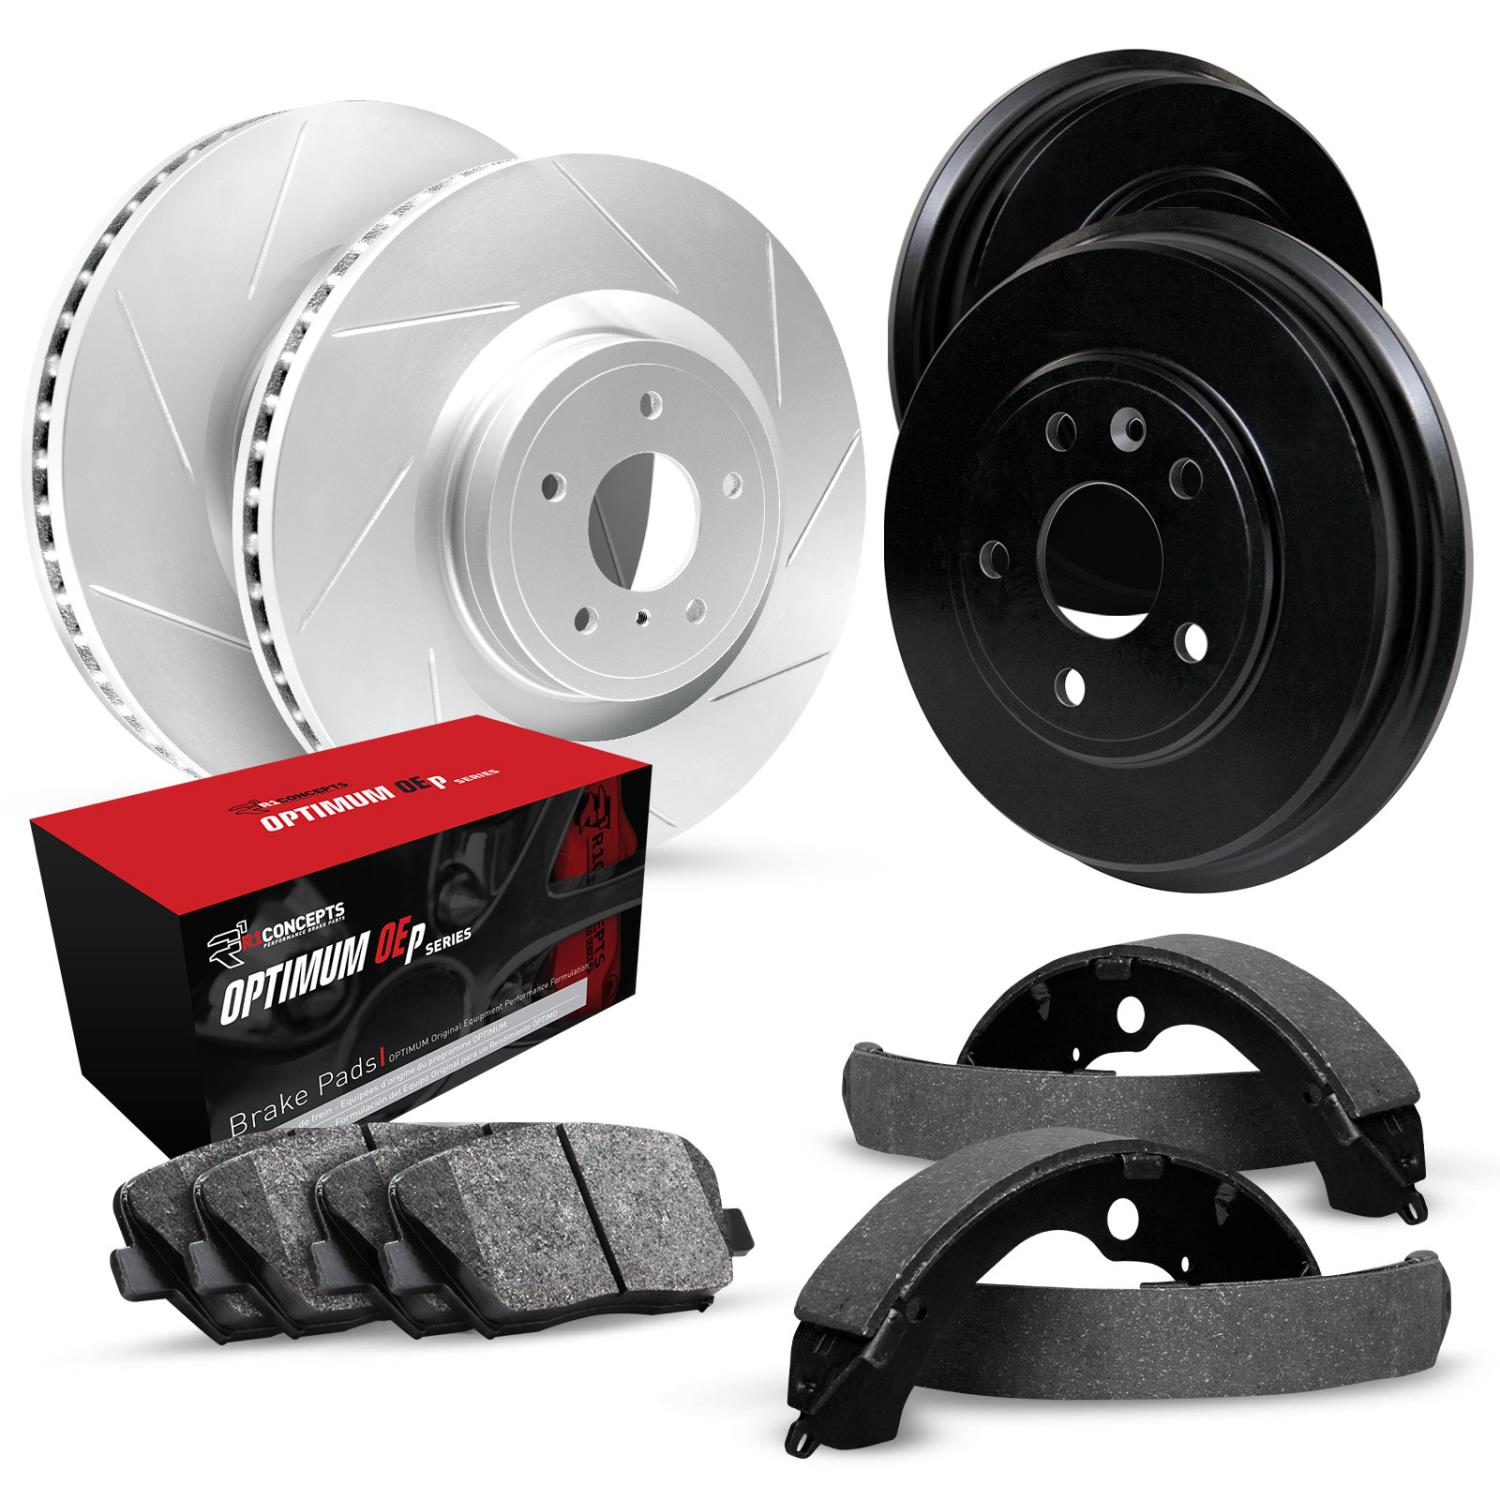 GEO-Carbon Slotted Brake Rotor & Drum Set w/Optimum OE Pads & Shoes, 1999-2003 Ford/Lincoln/Mercury/Mazda